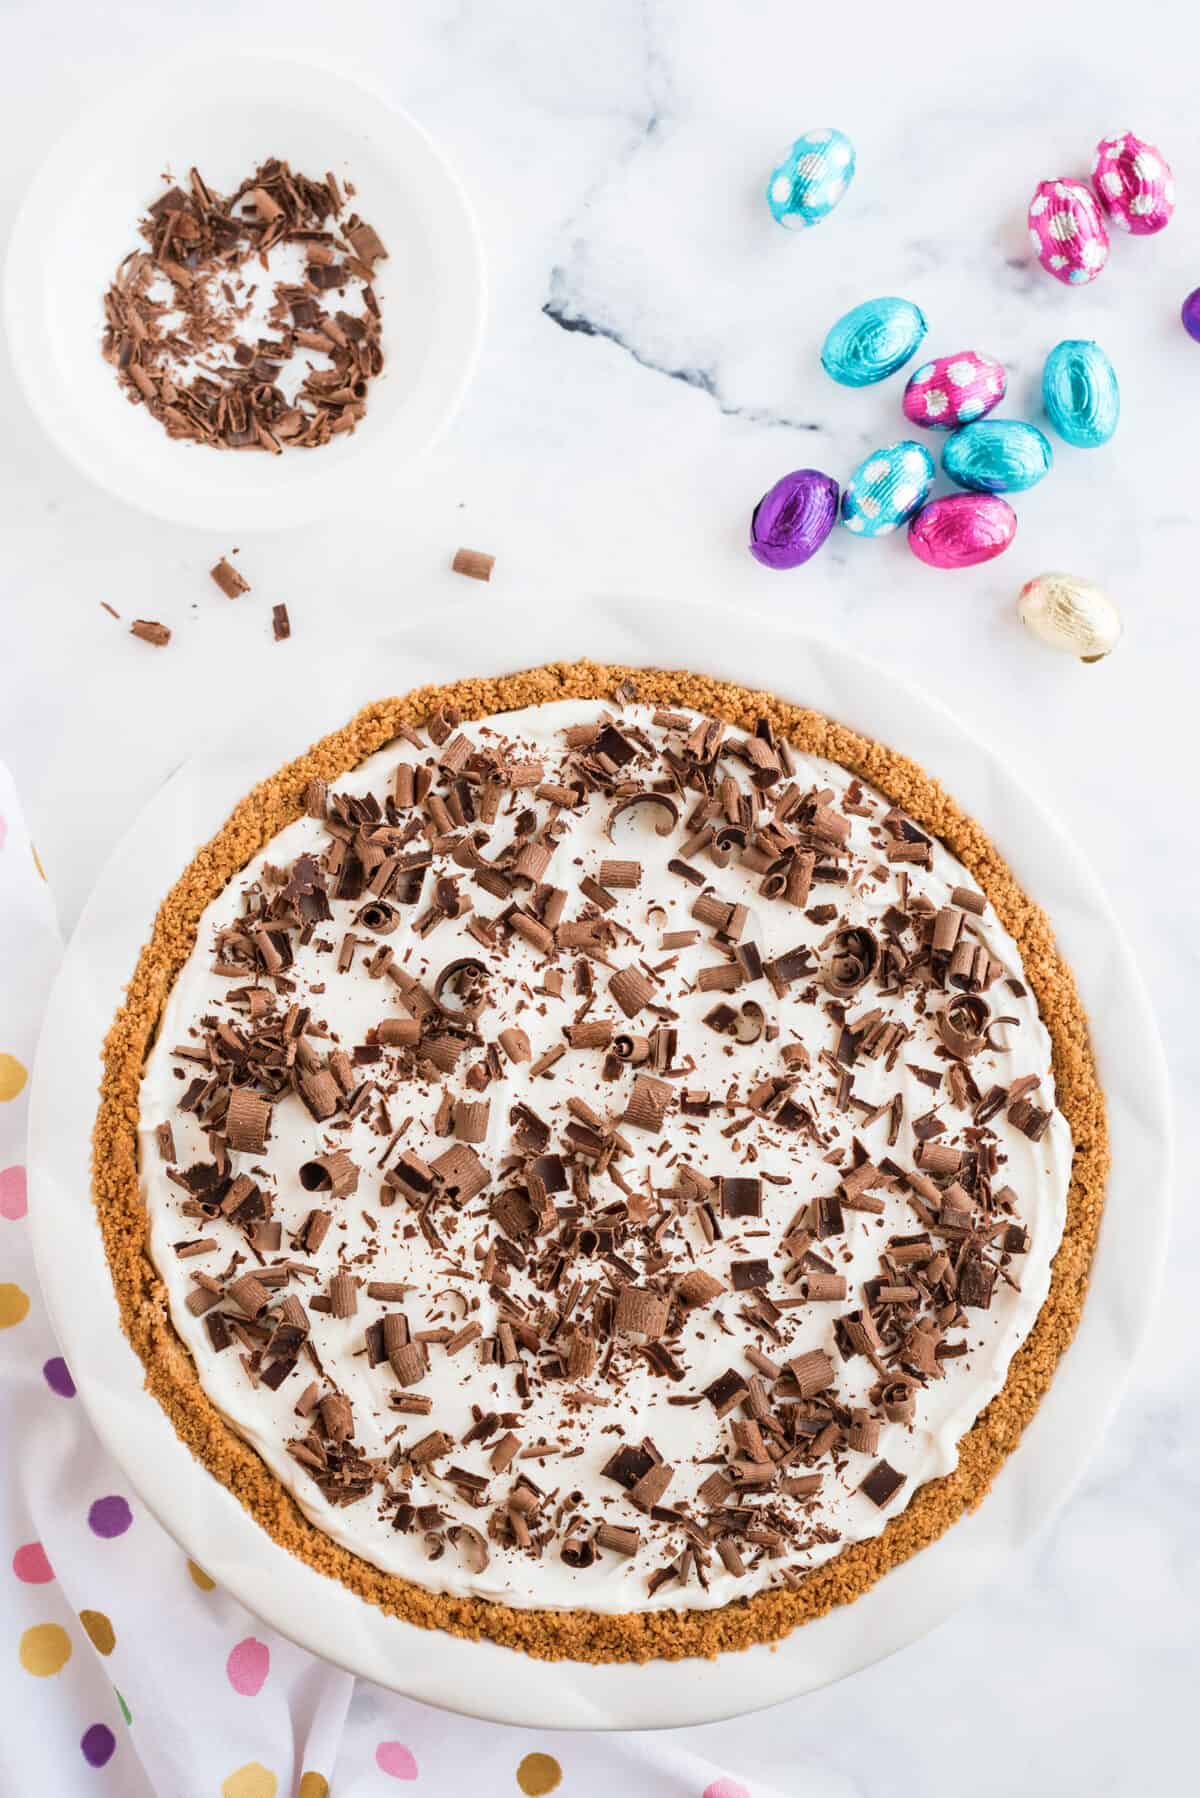 chocolate mousse pie with chocolate shavings on top